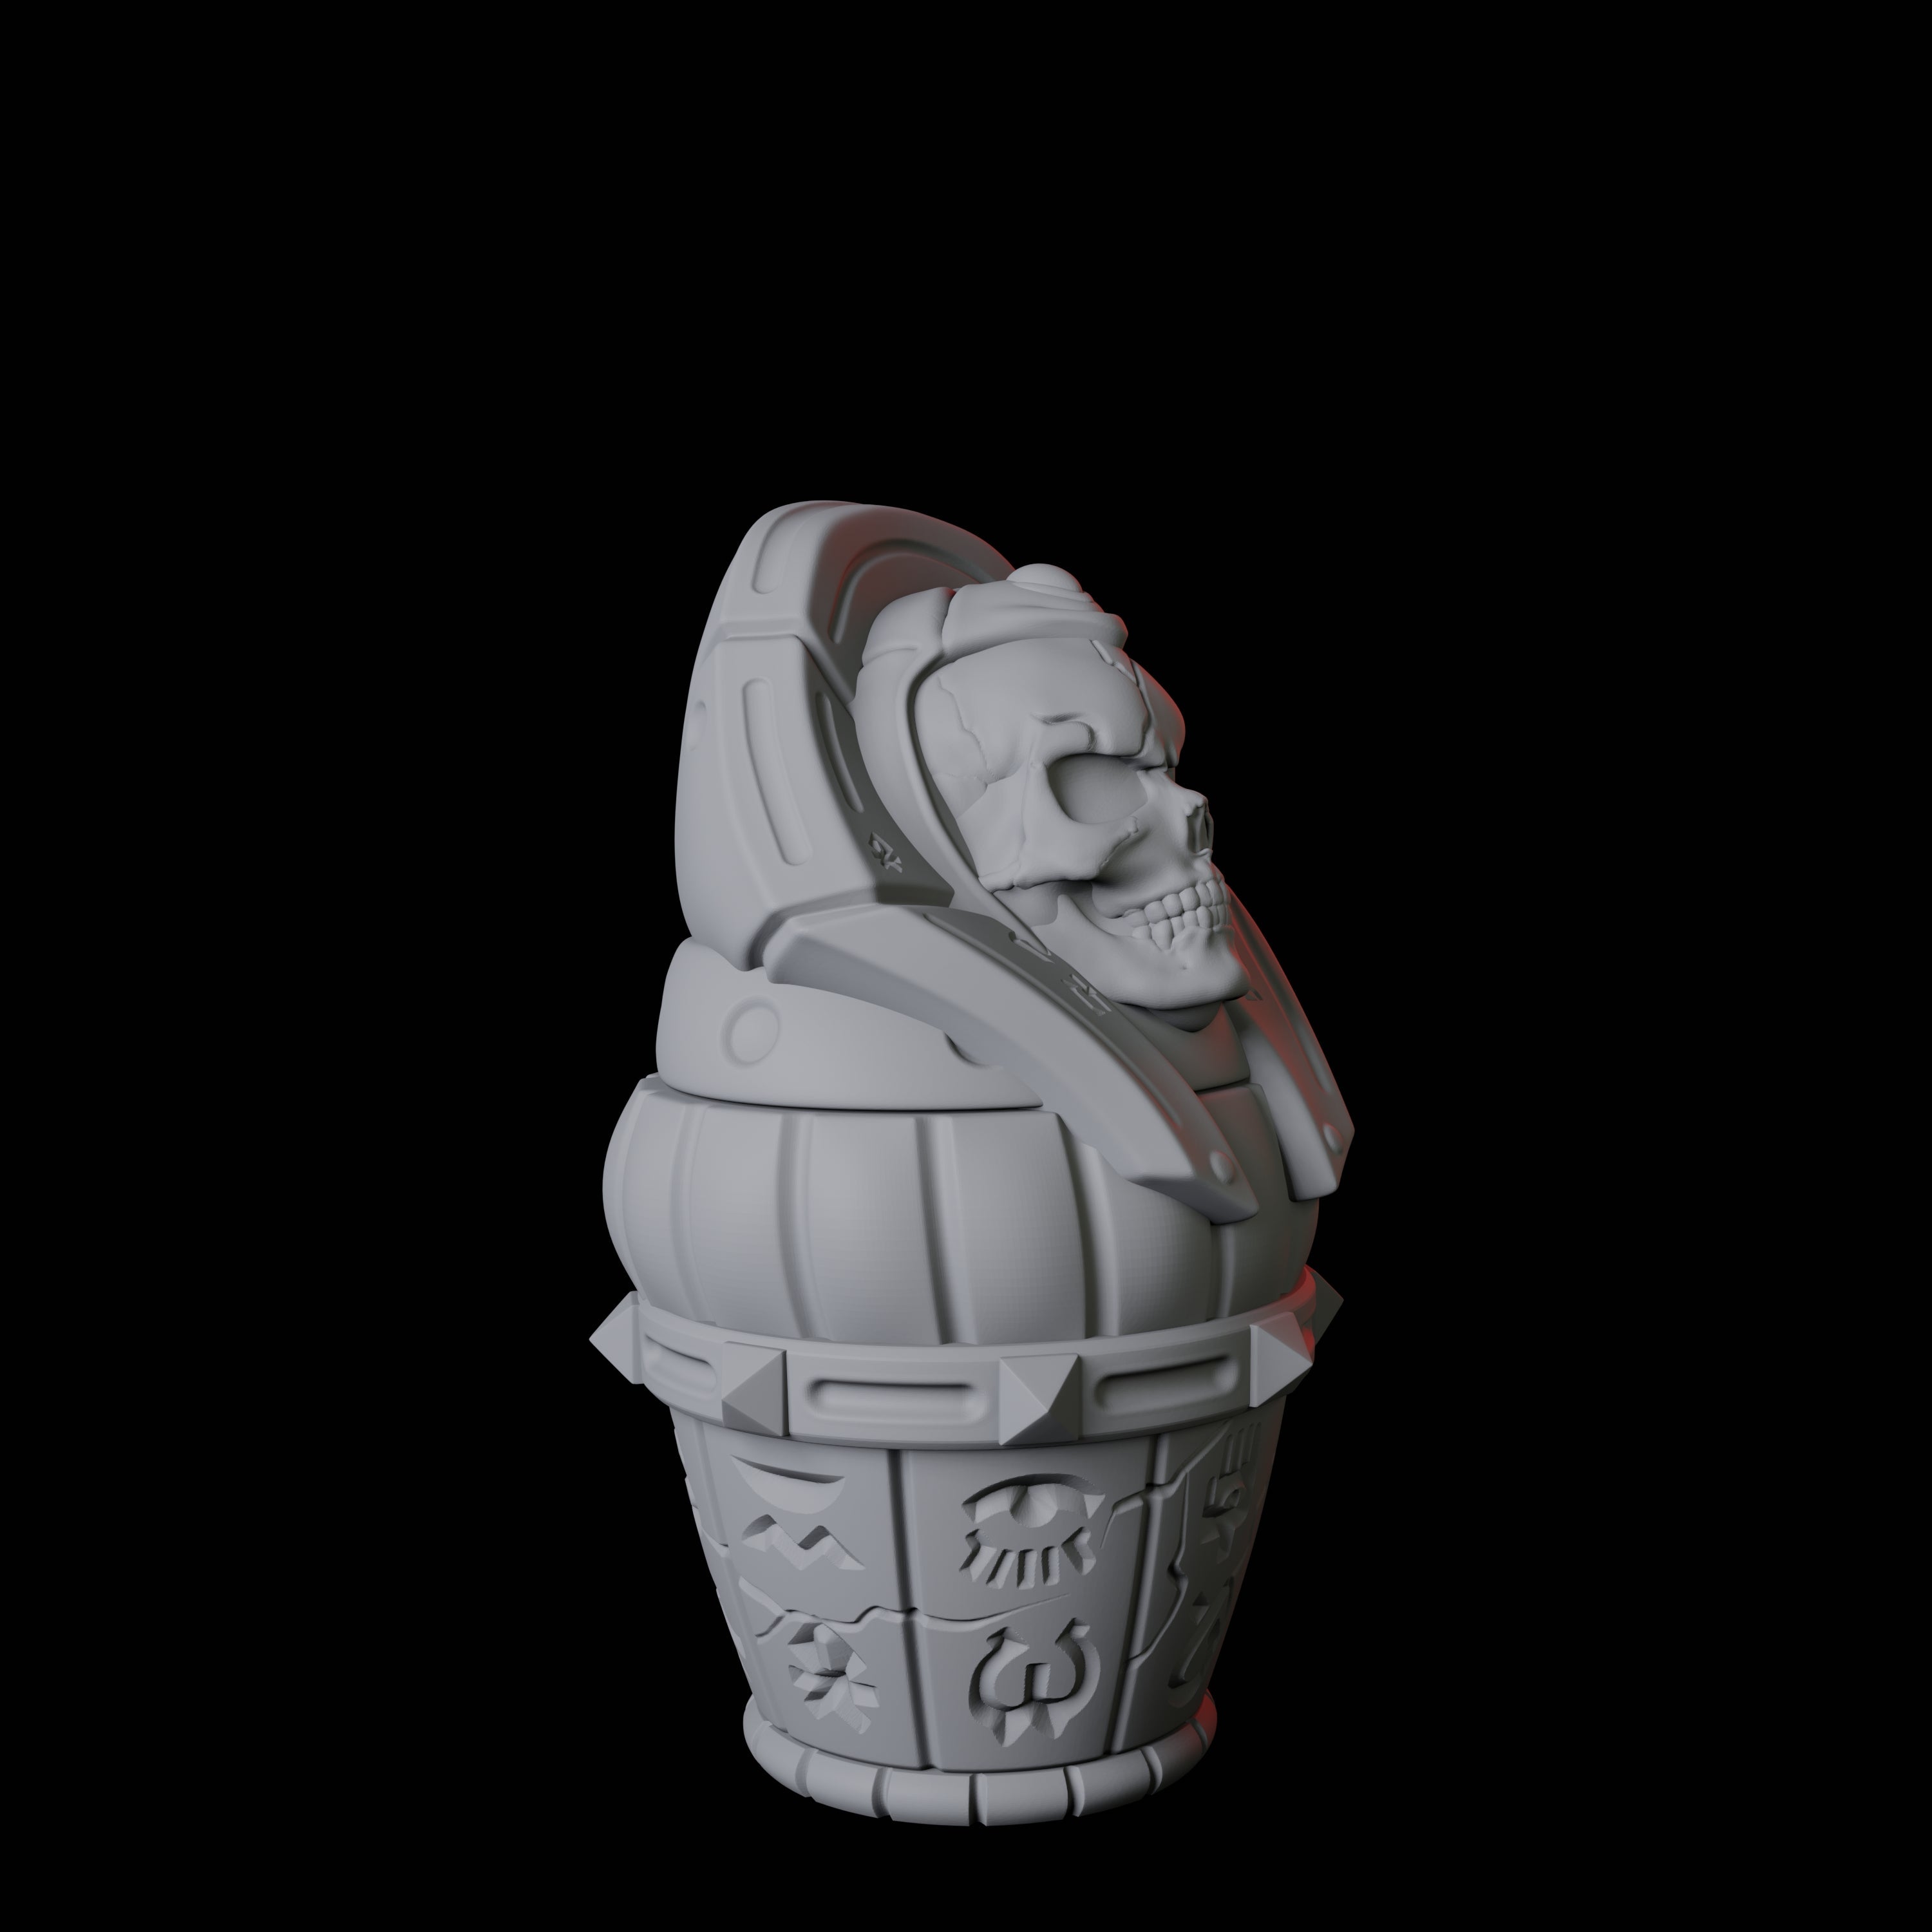 Ancient Egyptian Barrel Miniature for Dungeons and Dragons, Pathfinder or other TTRPGs